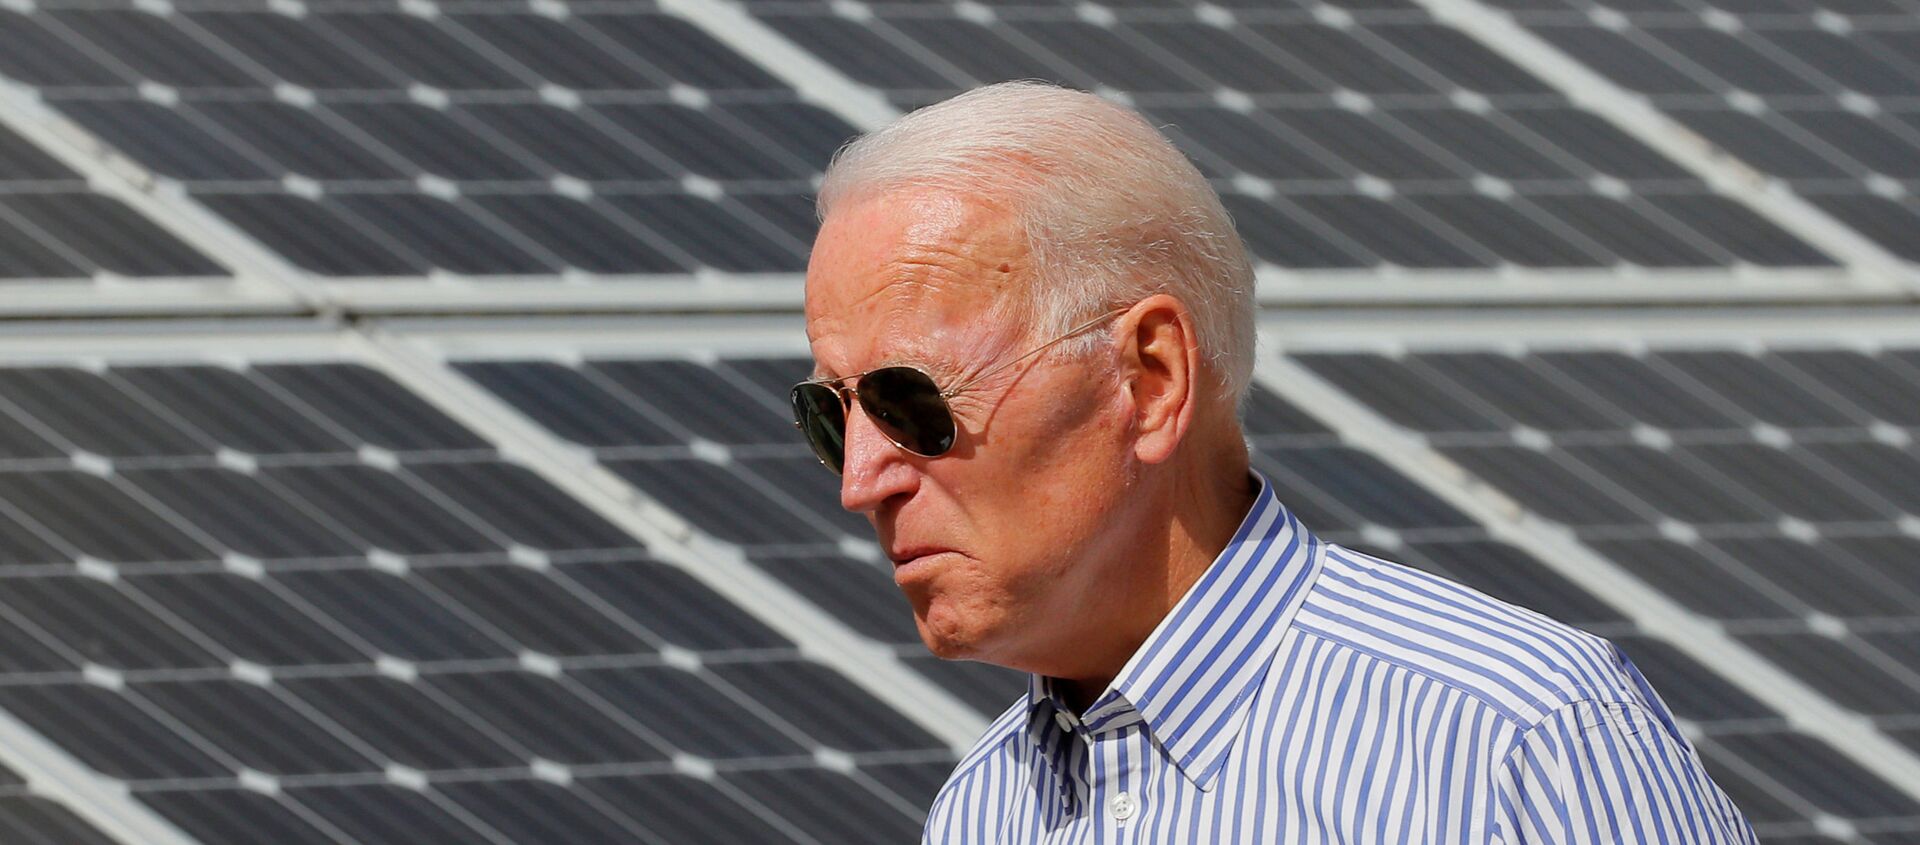 Democratic 2020 U.S. presidential candidate and former Vice President Joe Biden walks past solar panels while touring the Plymouth Area Renewable Energy Initiative in Plymouth, New Hampshire, U.S., June 4, 2019.  - Sputnik International, 1920, 31.03.2021